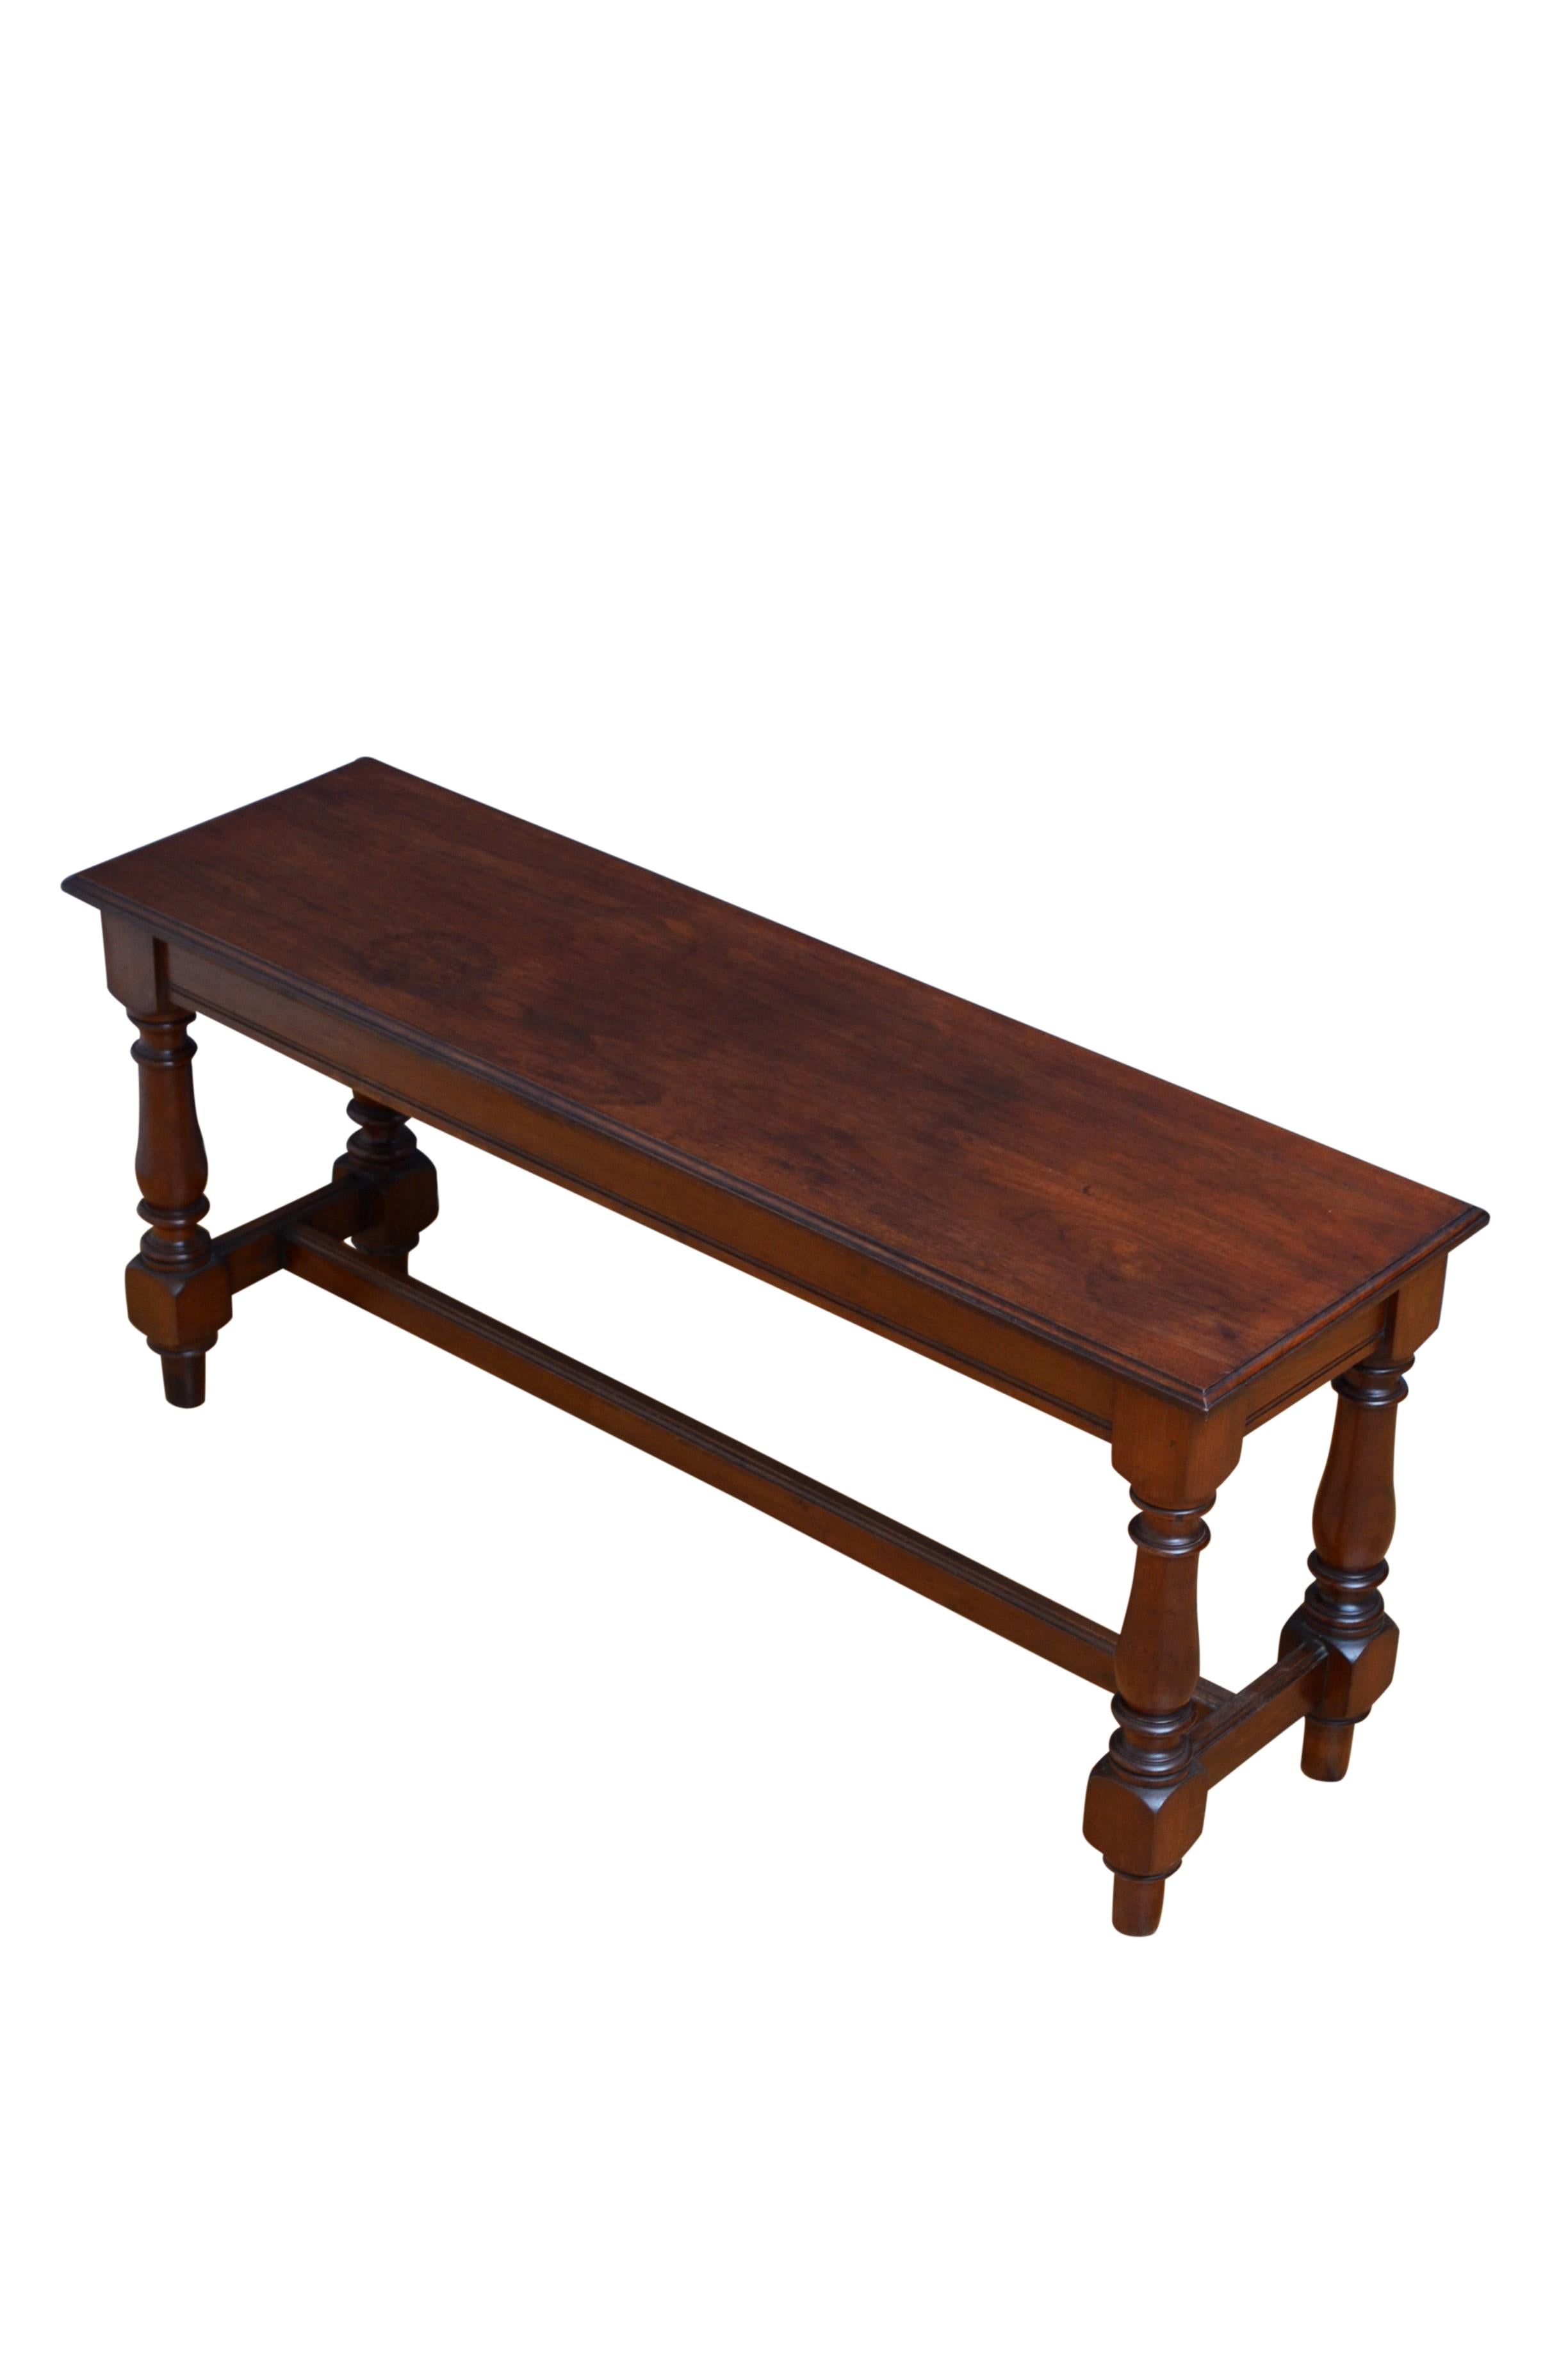 K0561 A substantial walnut hall seat, having solid, figured walnut seat with moulded edge above shallow reeded frieze, standing on baluster legs united by stretchers. This antique bench is in home ready condition, retaining its antique character and